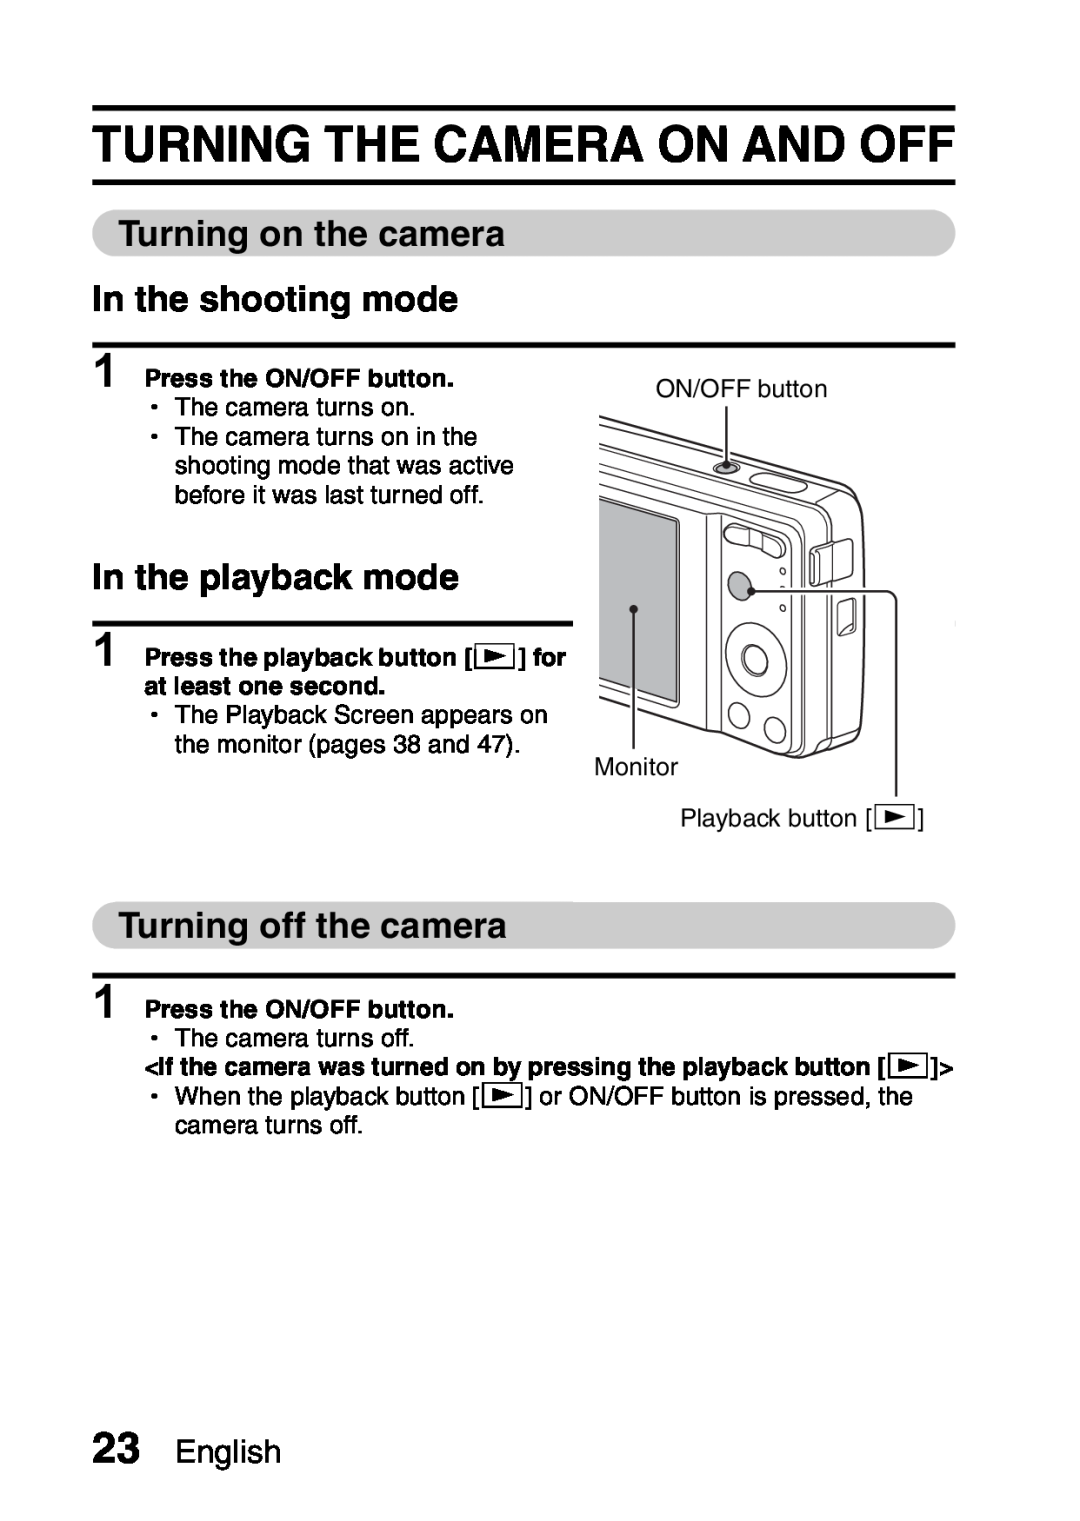 Samsung R50 Turning The Camera On And Off, Turning on the camera In the shooting mode, In the playback mode, English 